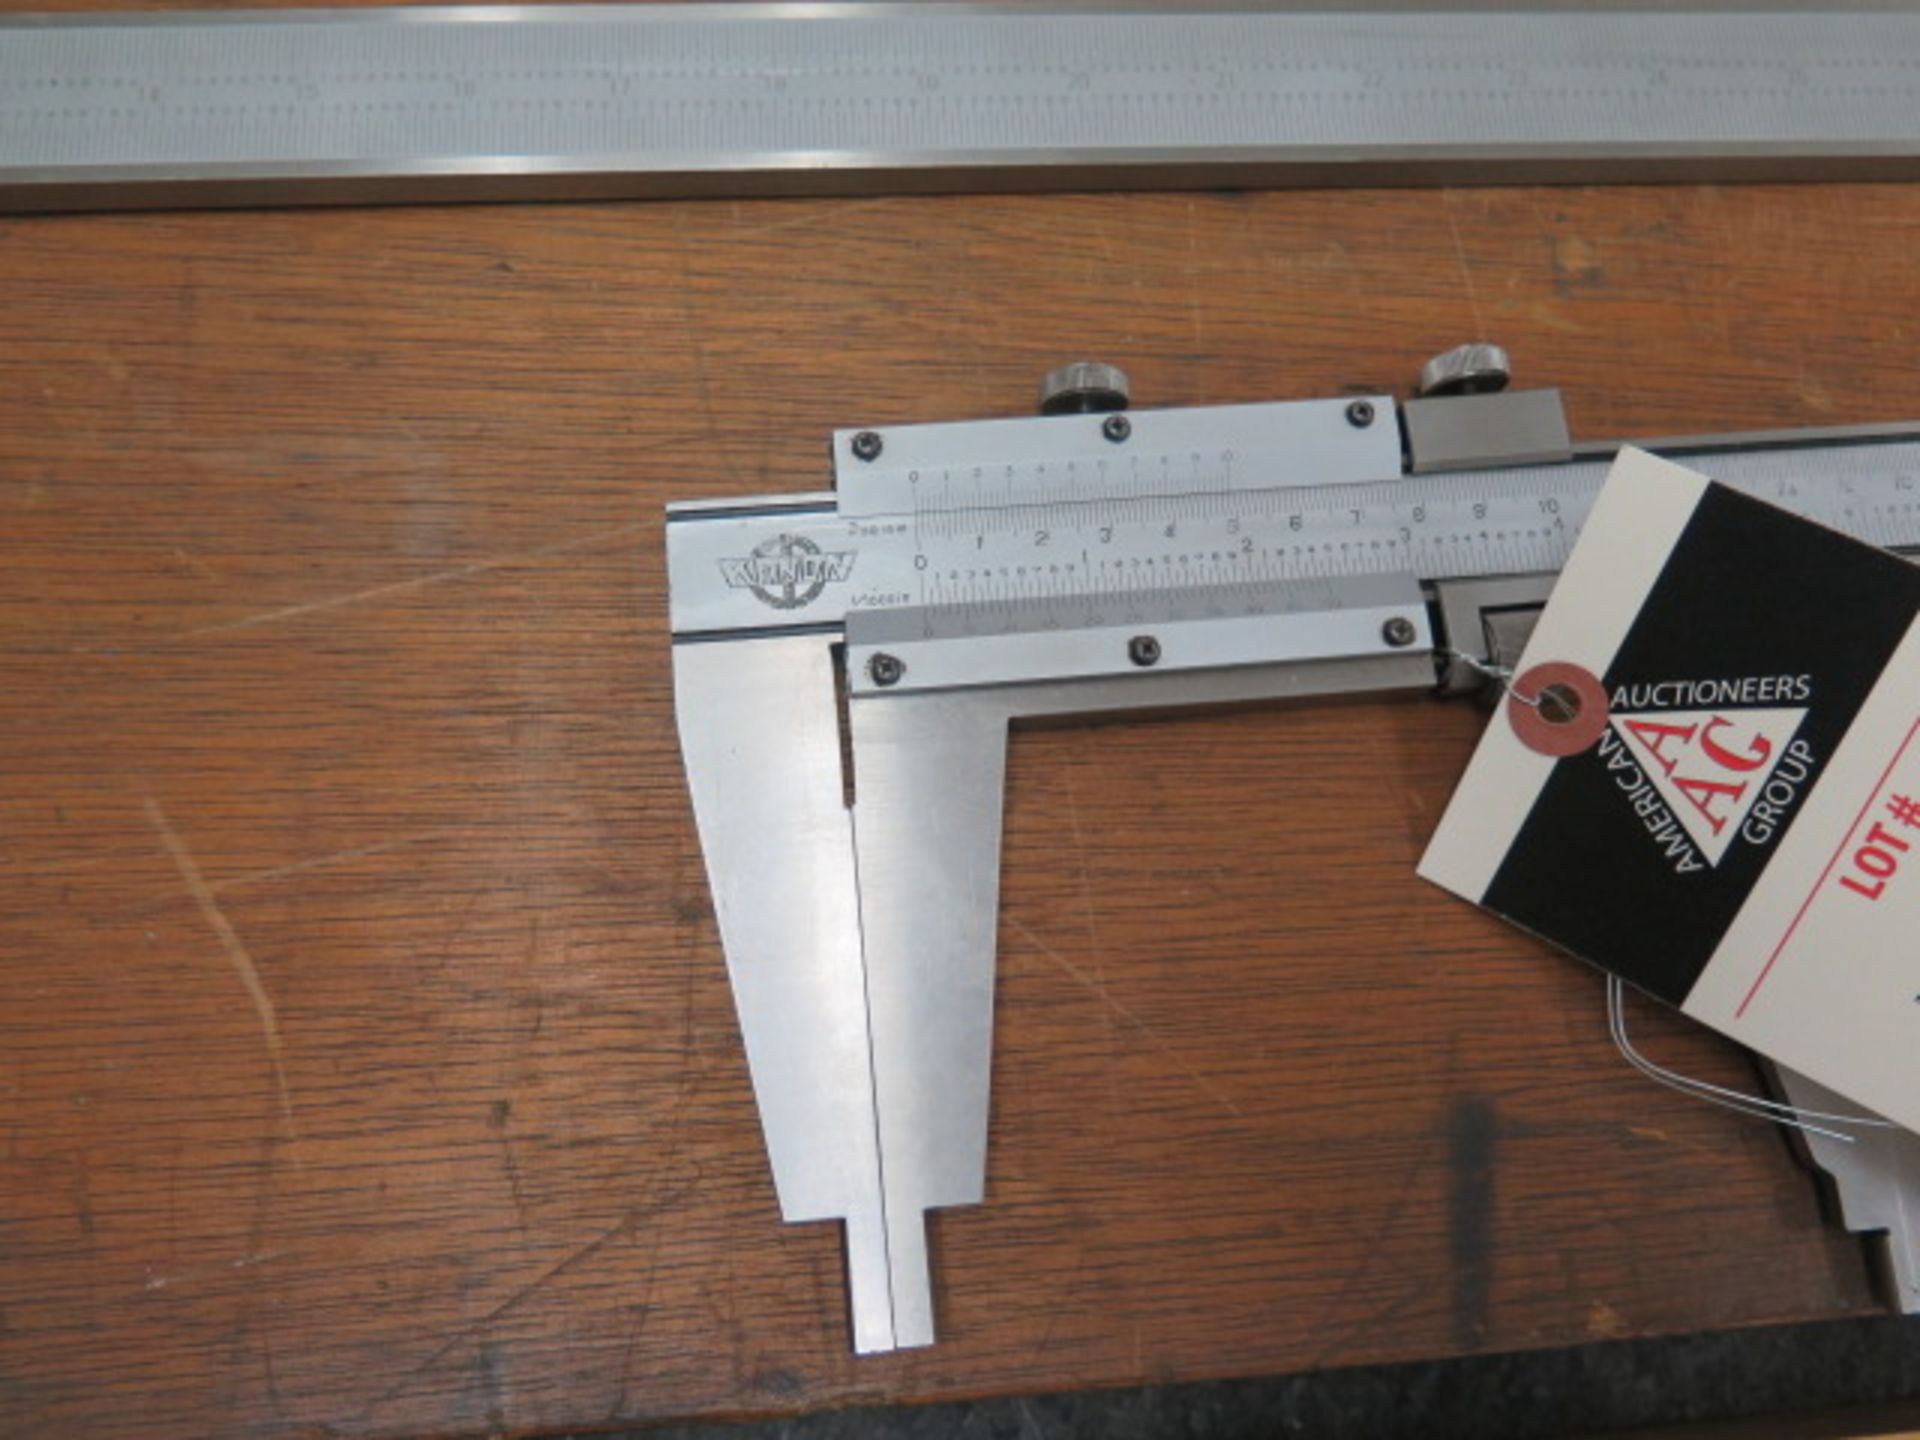 Kanon 24" and 12" Vernier Calipers - Image 2 of 2